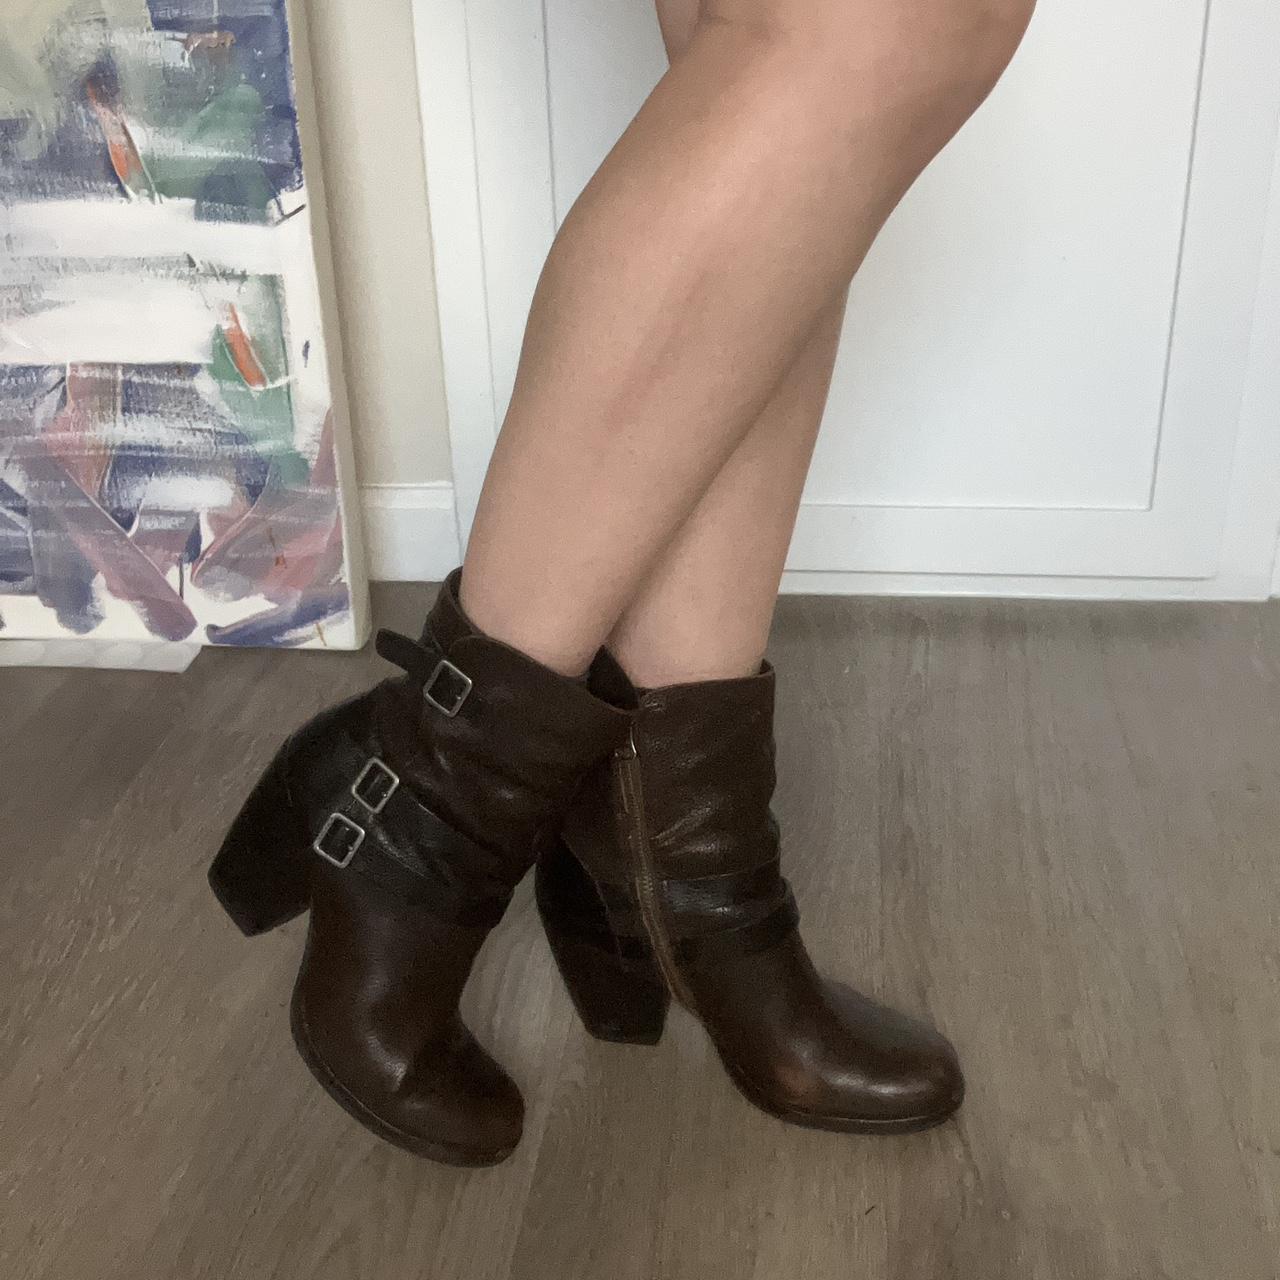 Korks Women's Brown and Black Boots